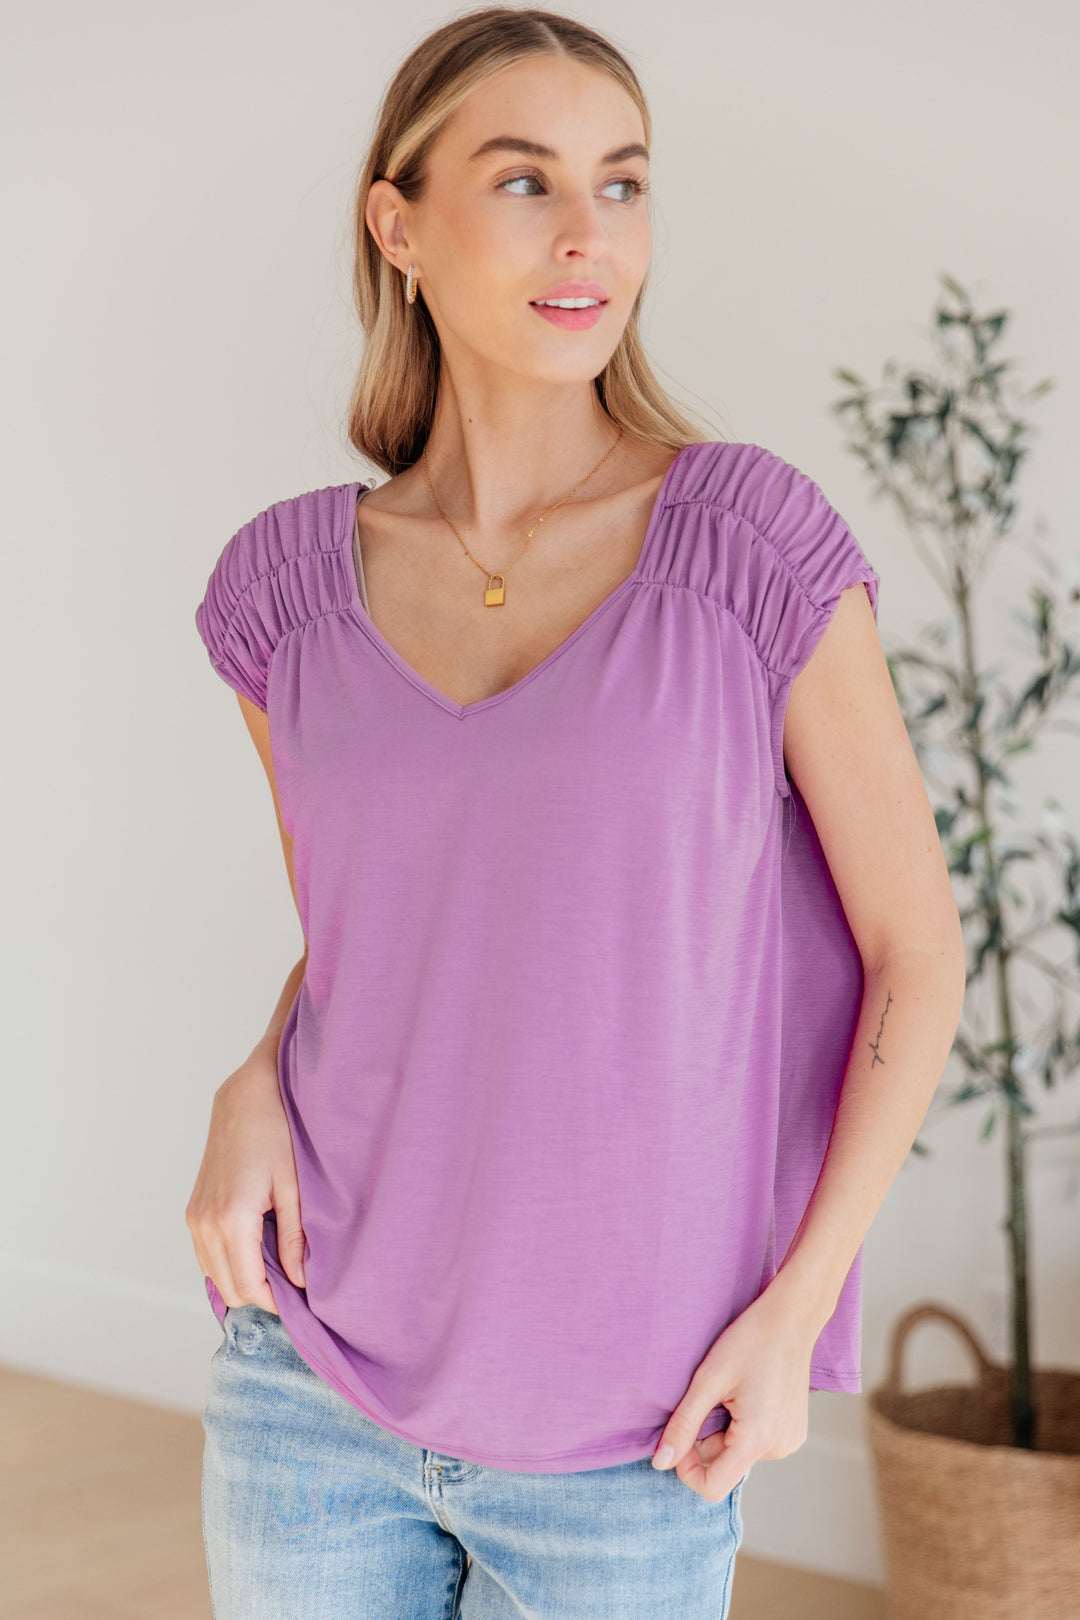 Ruched Cap Sleeve Top in Lavender-Short Sleeve Tops-Inspired by Justeen-Women's Clothing Boutique in Chicago, Illinois